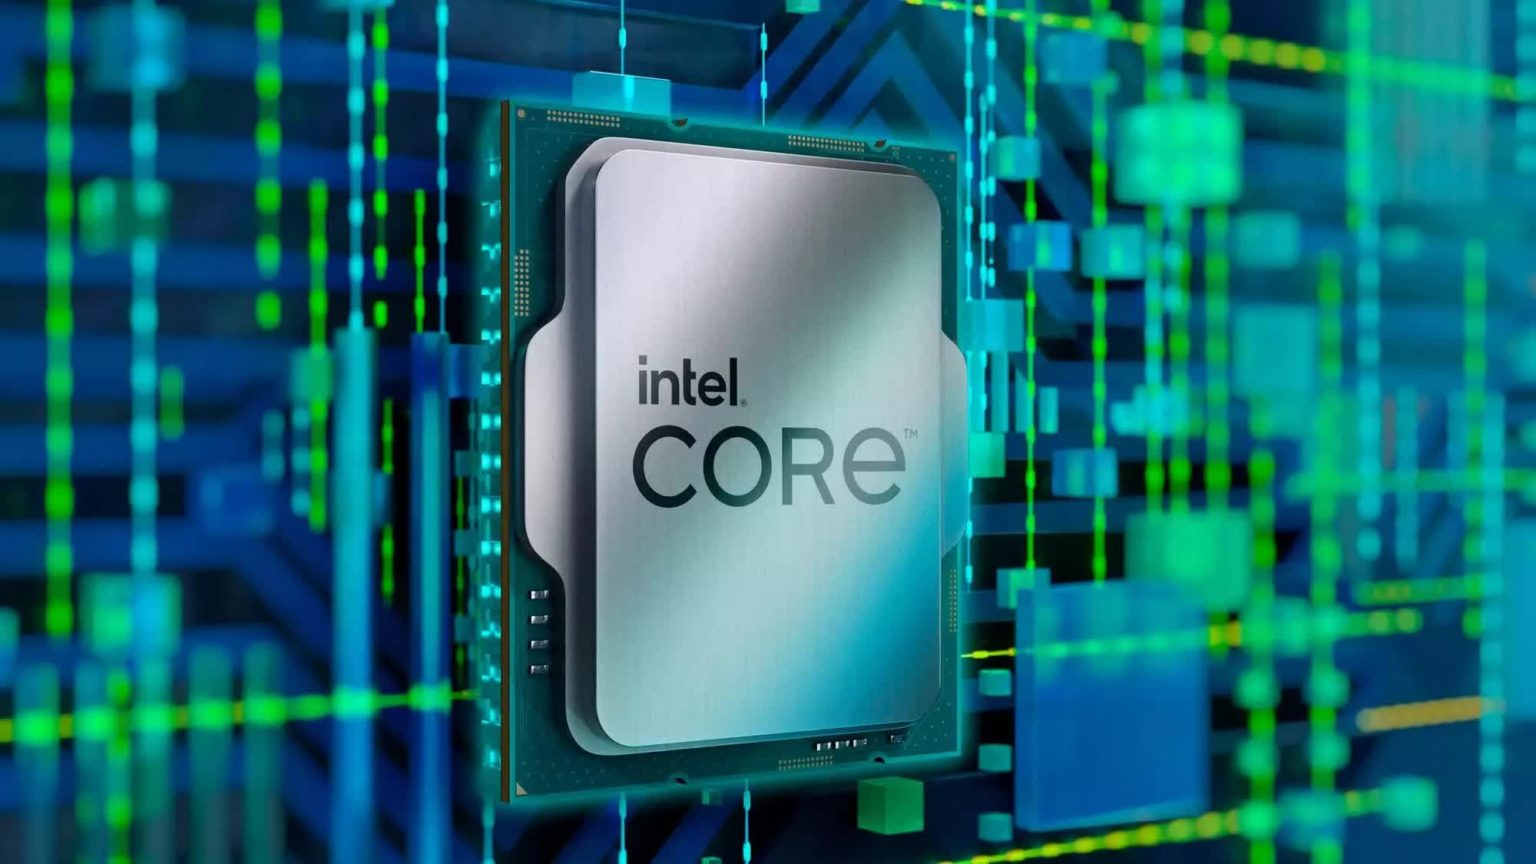 Intel details iGPU specs and process nodes for Arrow Lake and Lunar Lake CPUs